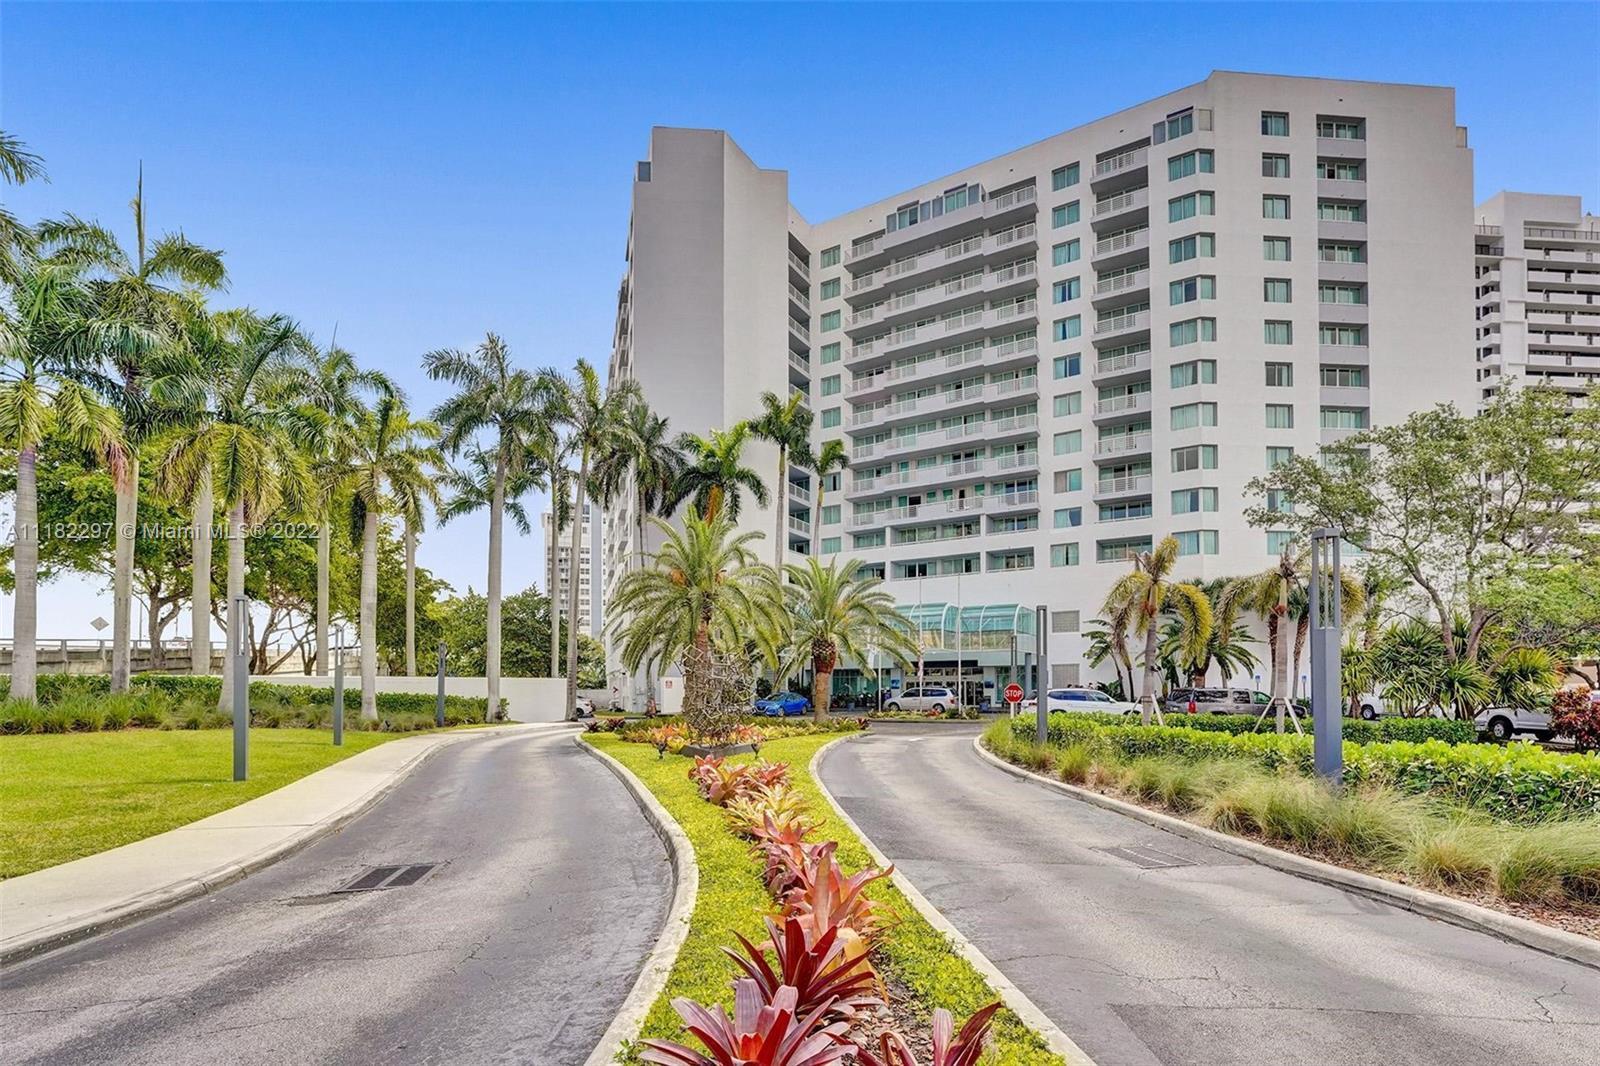 Located few steps away from the famous beaches of Fort Lauderdale, this beautiful,Condo-Hotel double